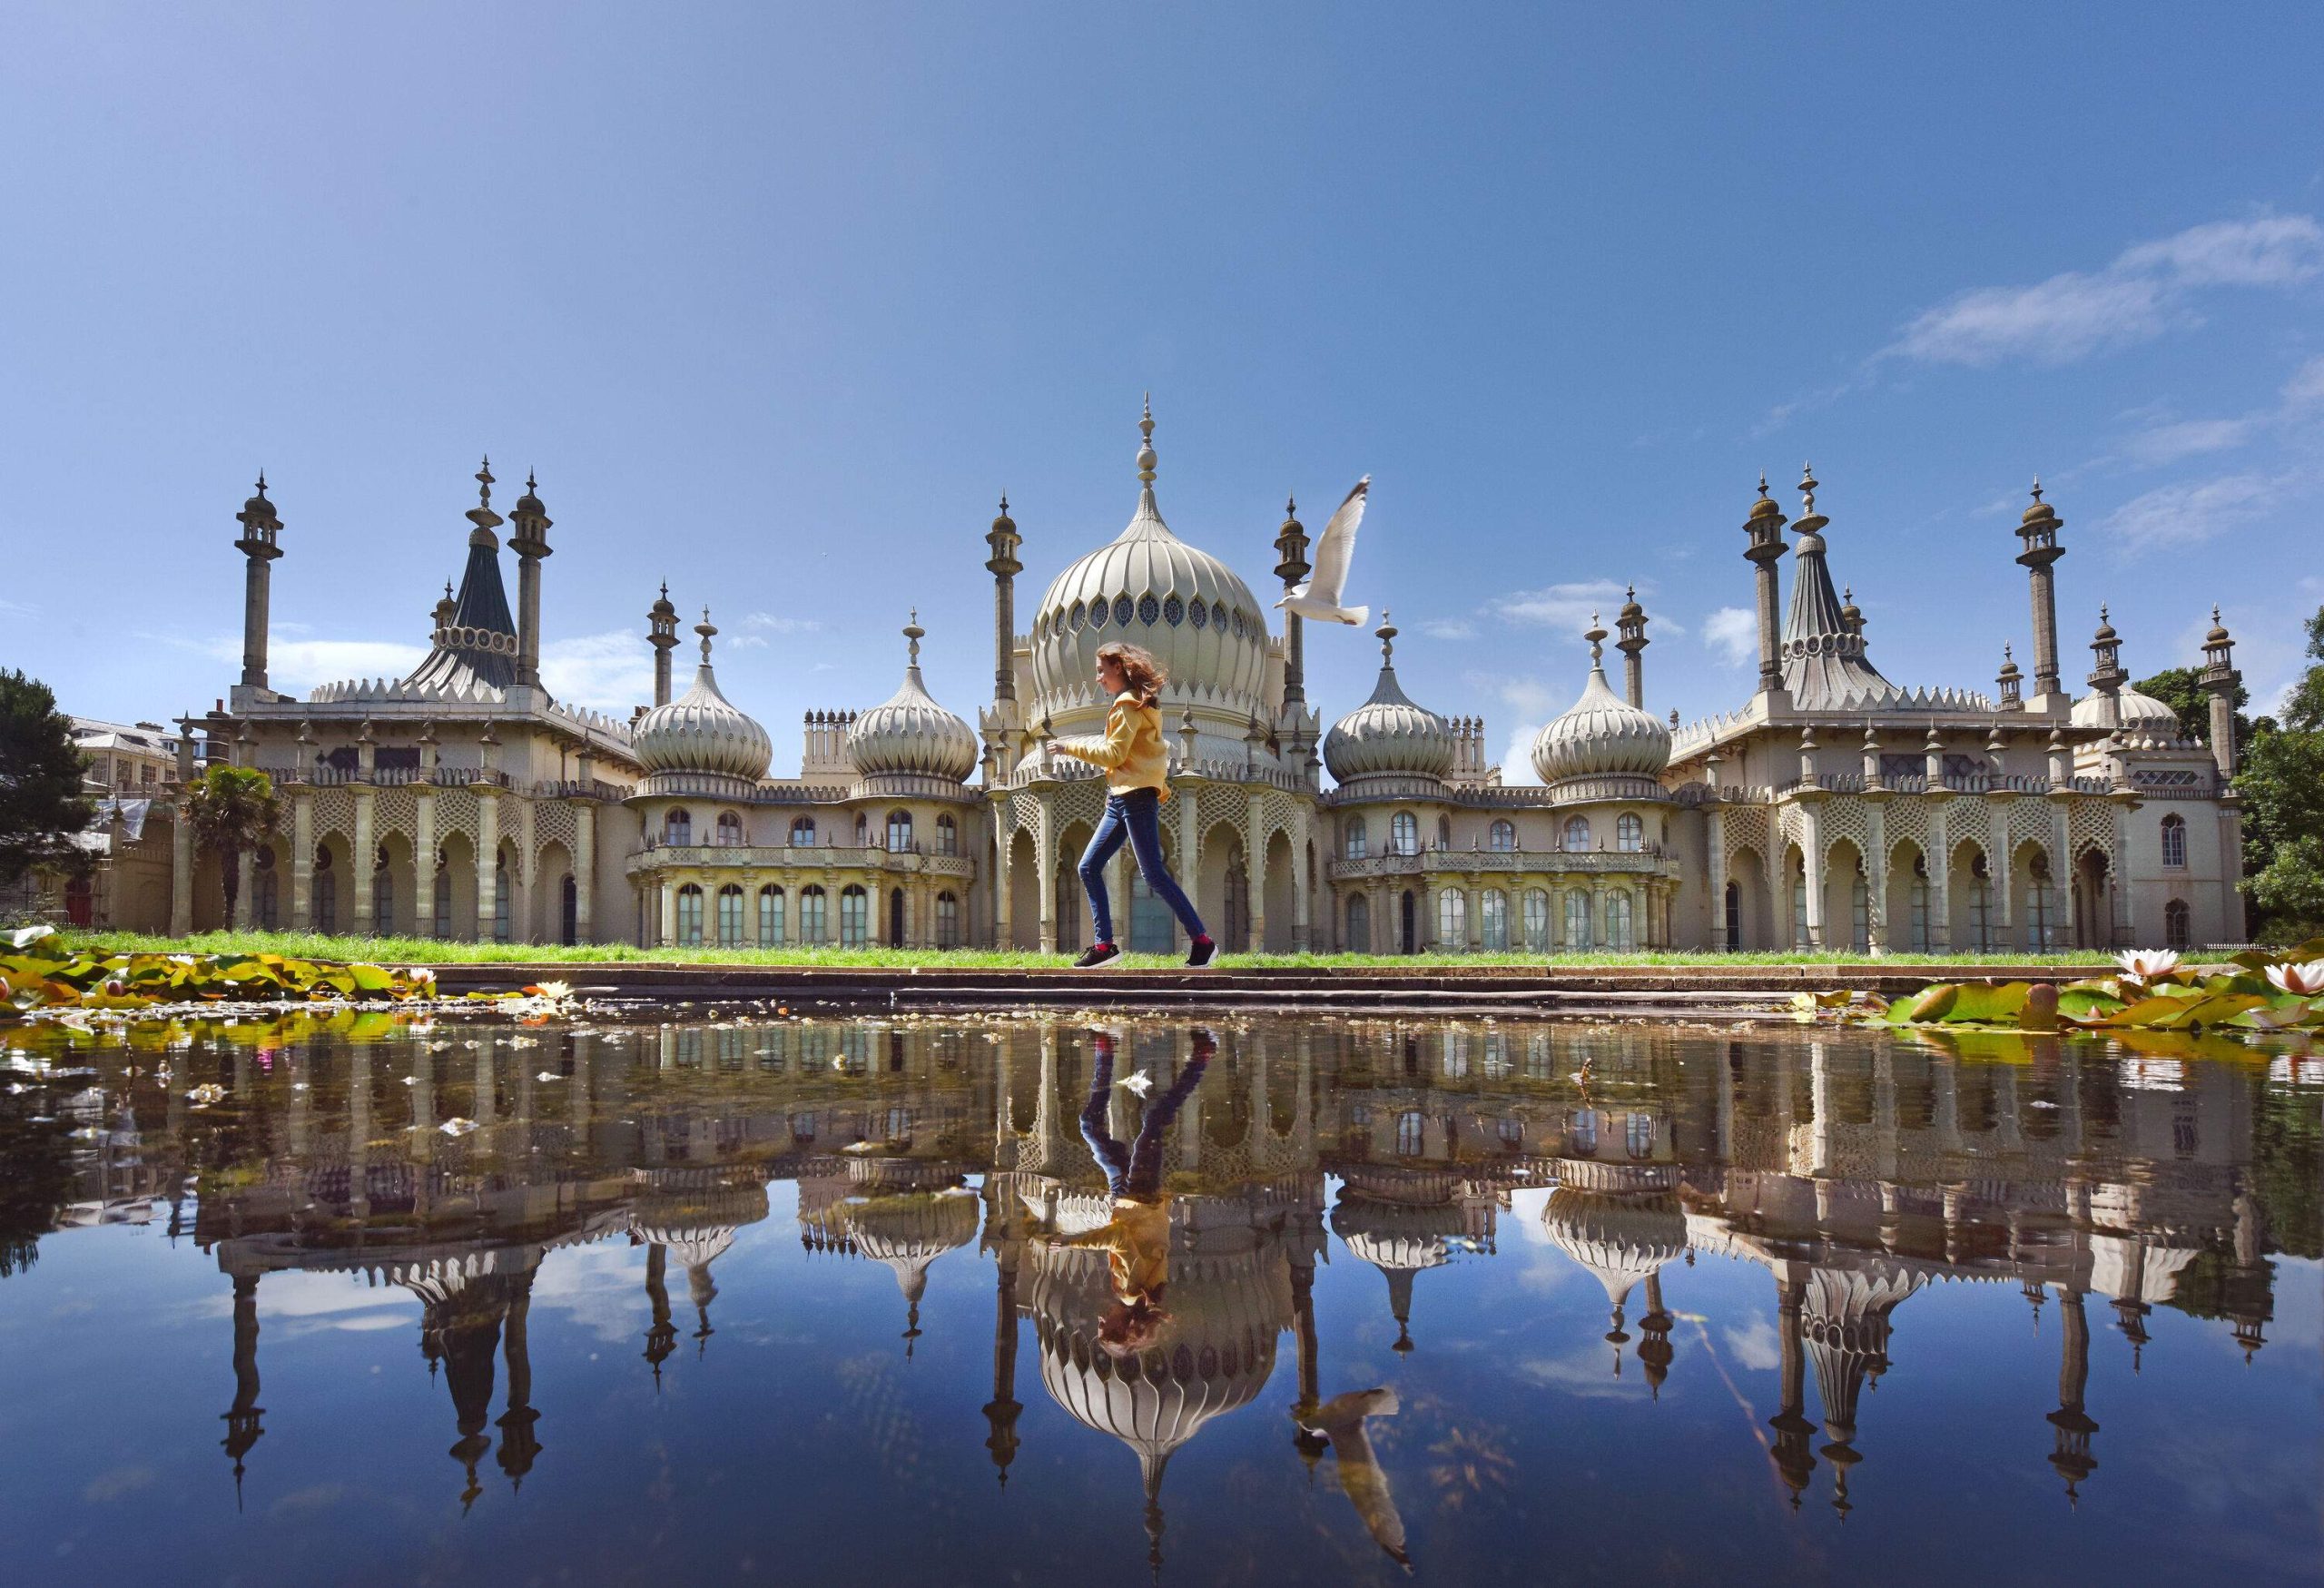 A girl runs alongside a pond with the Brighton Pavilion mirrored on its surface.